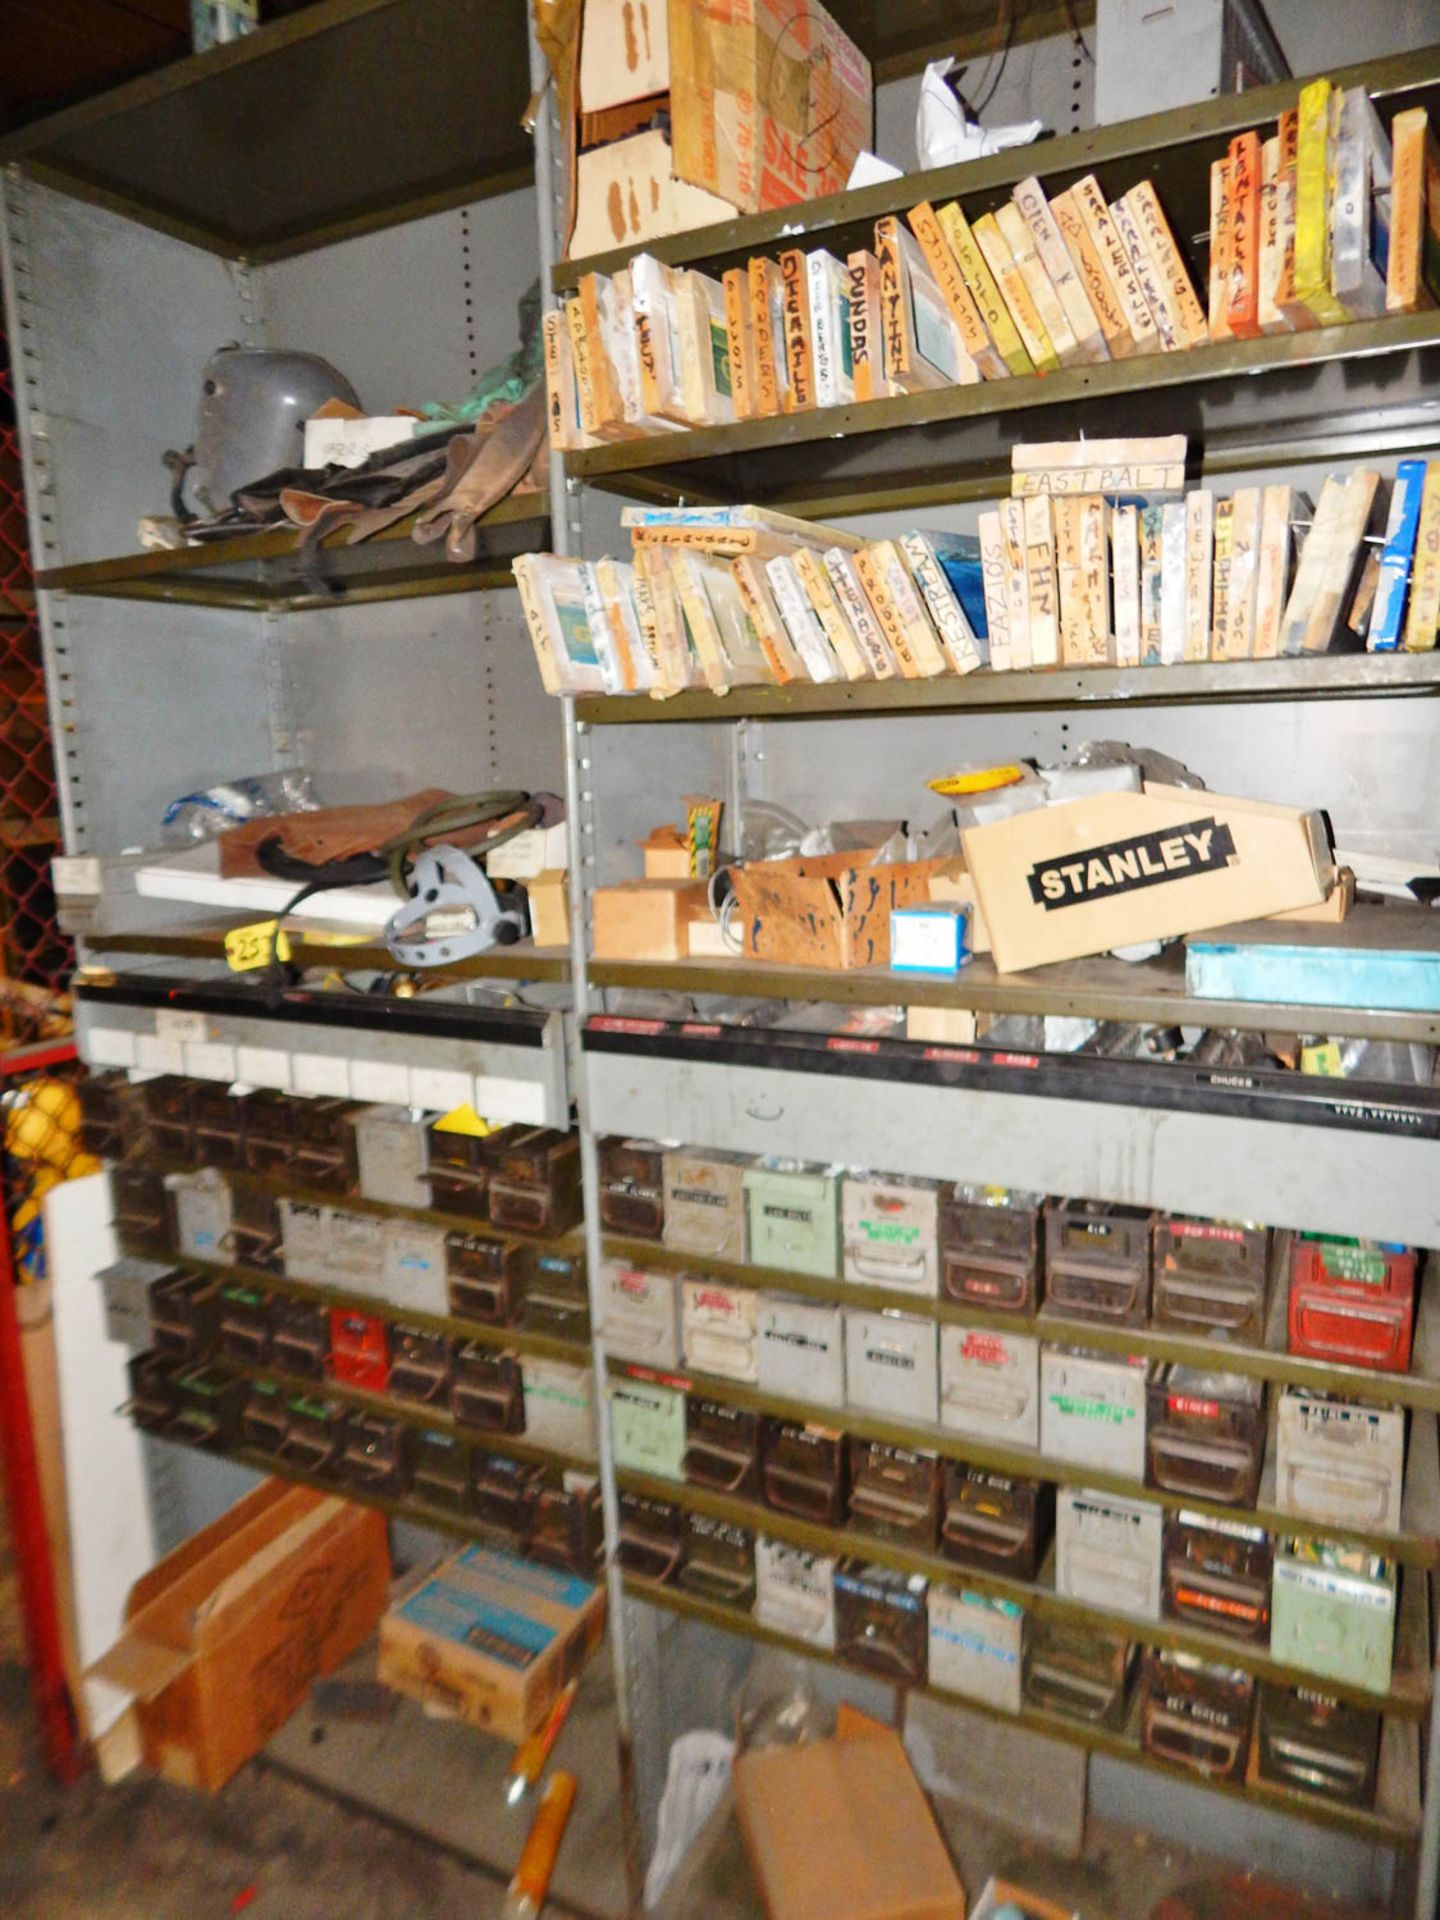 [2] SECTIONS OF SHELVING WITH ASSORTED HARDWARE